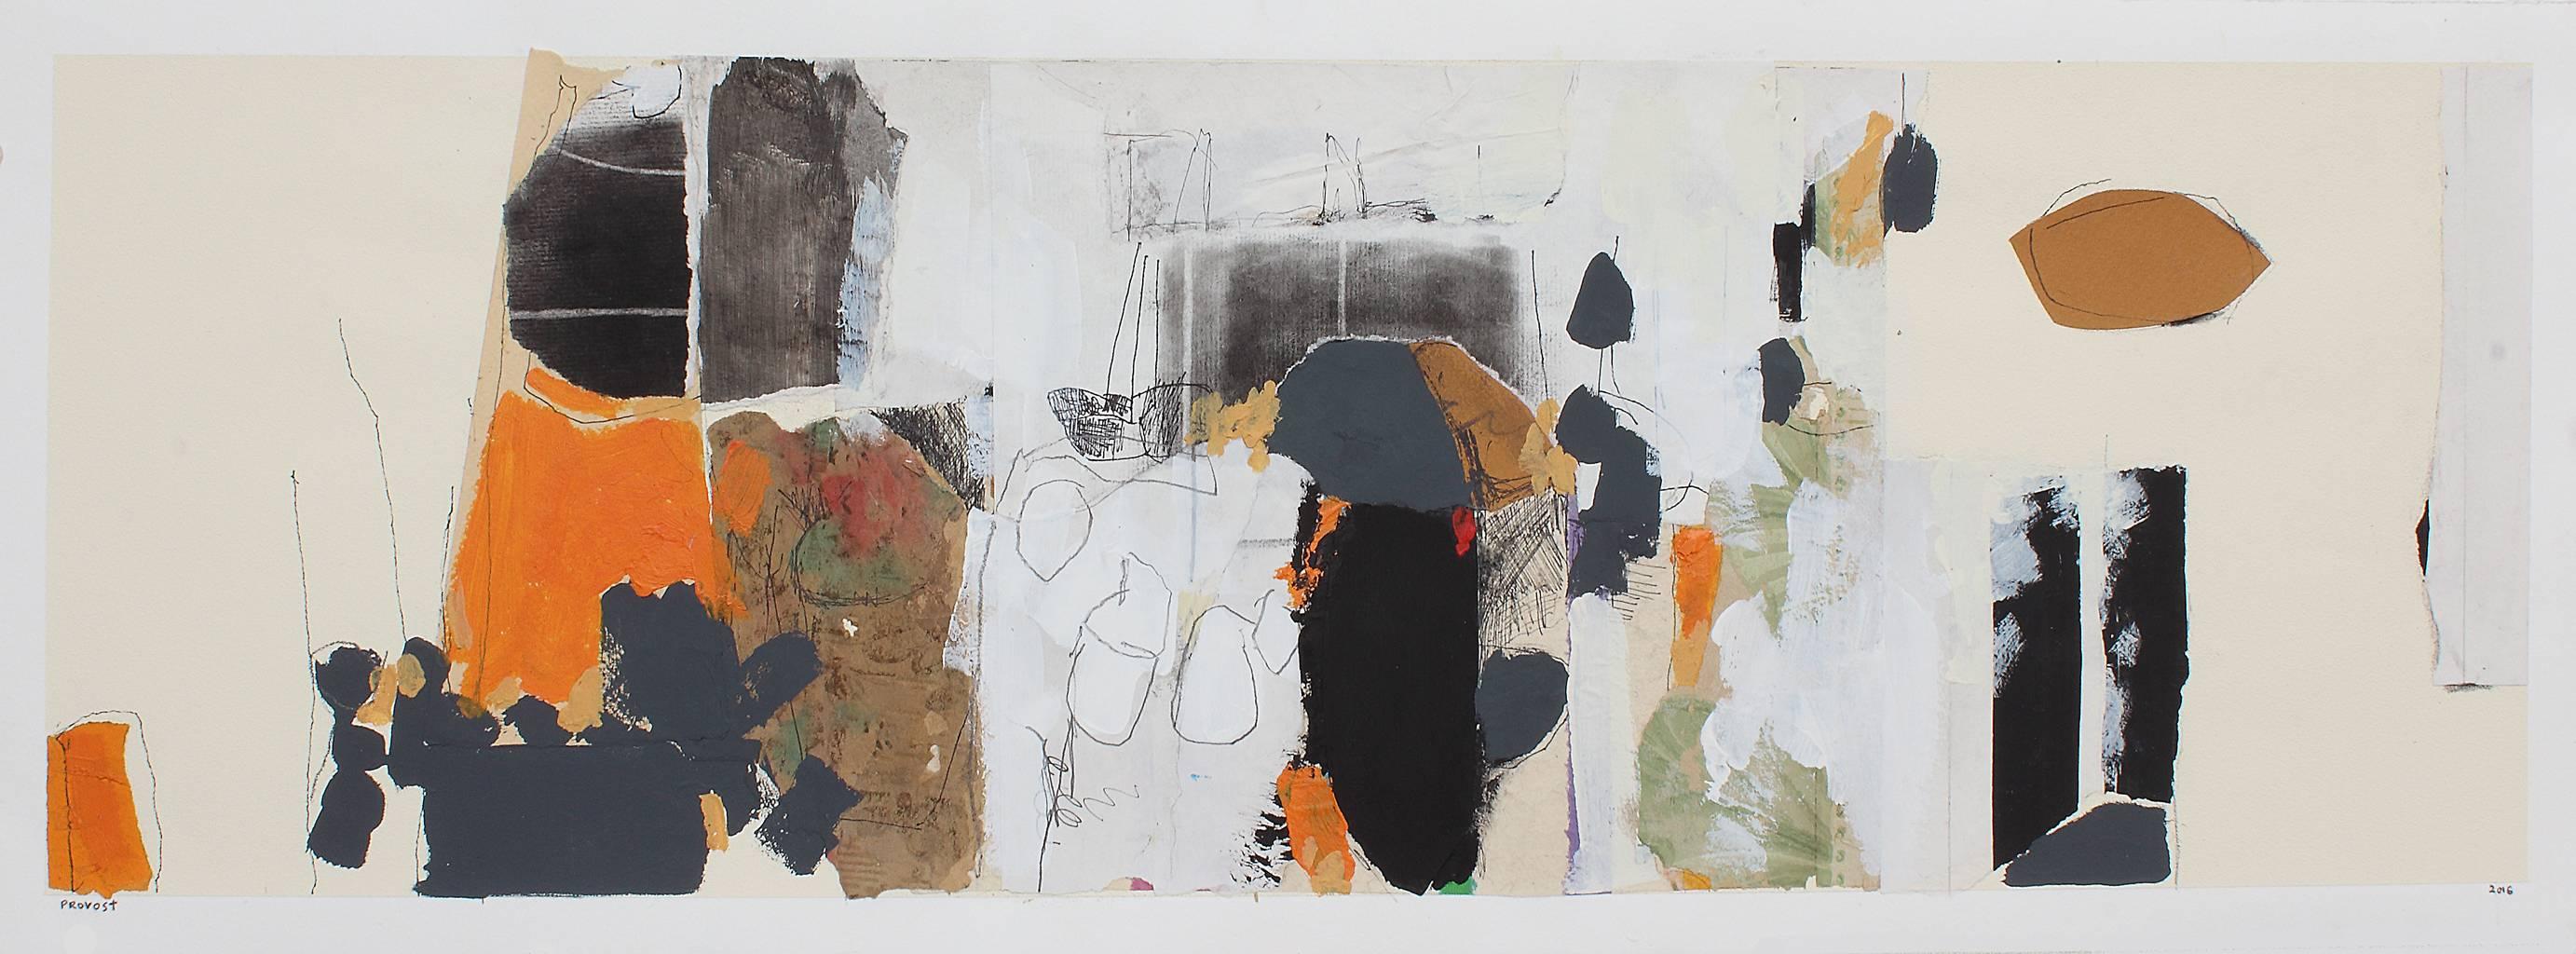 Jean-François Provost Abstract Painting - Sentier Du Marais 2, collaged mixed media painting on paper